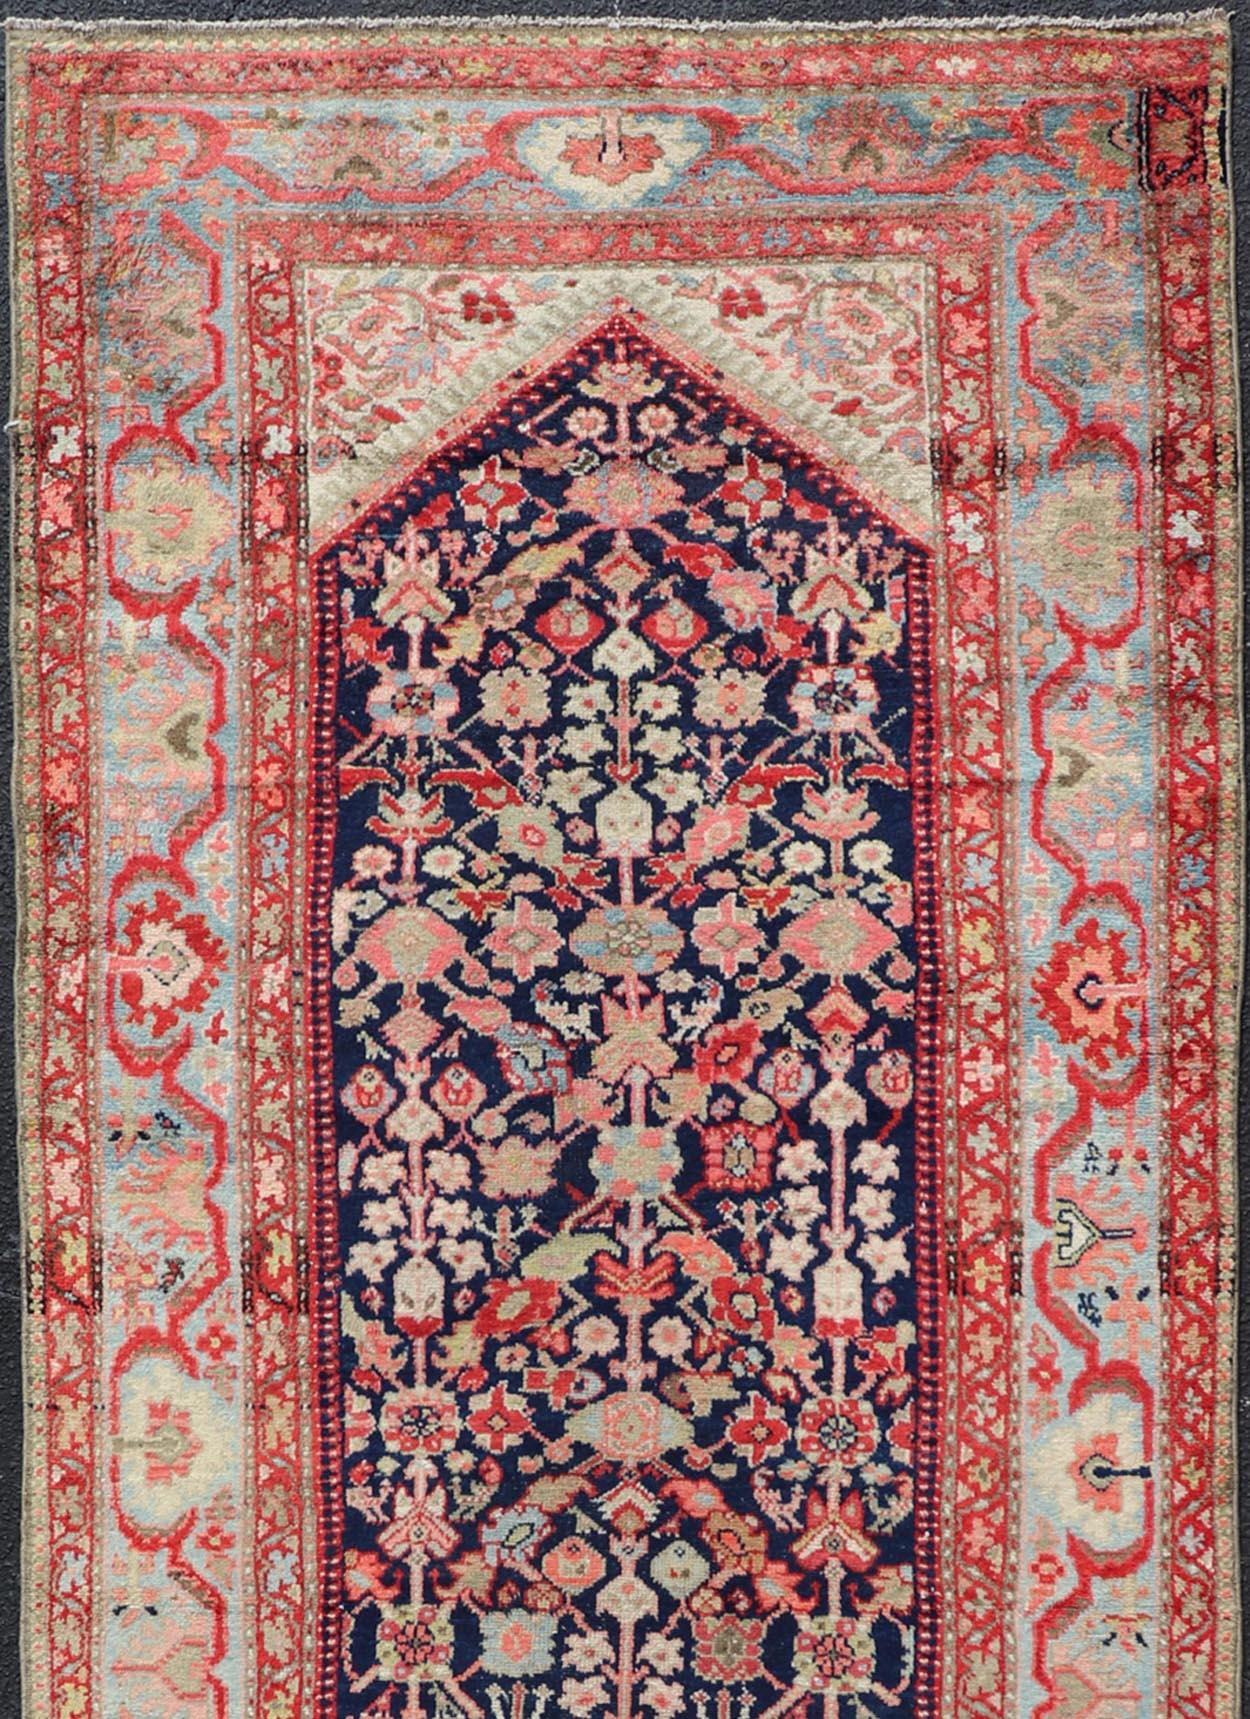 Measures: 4'2 x 11'5 

This antique Persian Hamadan is bright and bold, with a navy background with rich red, pink, sky blue, and pastel accent colors filling the field. The entire rug, from the field cornices to the triple-tiered border is